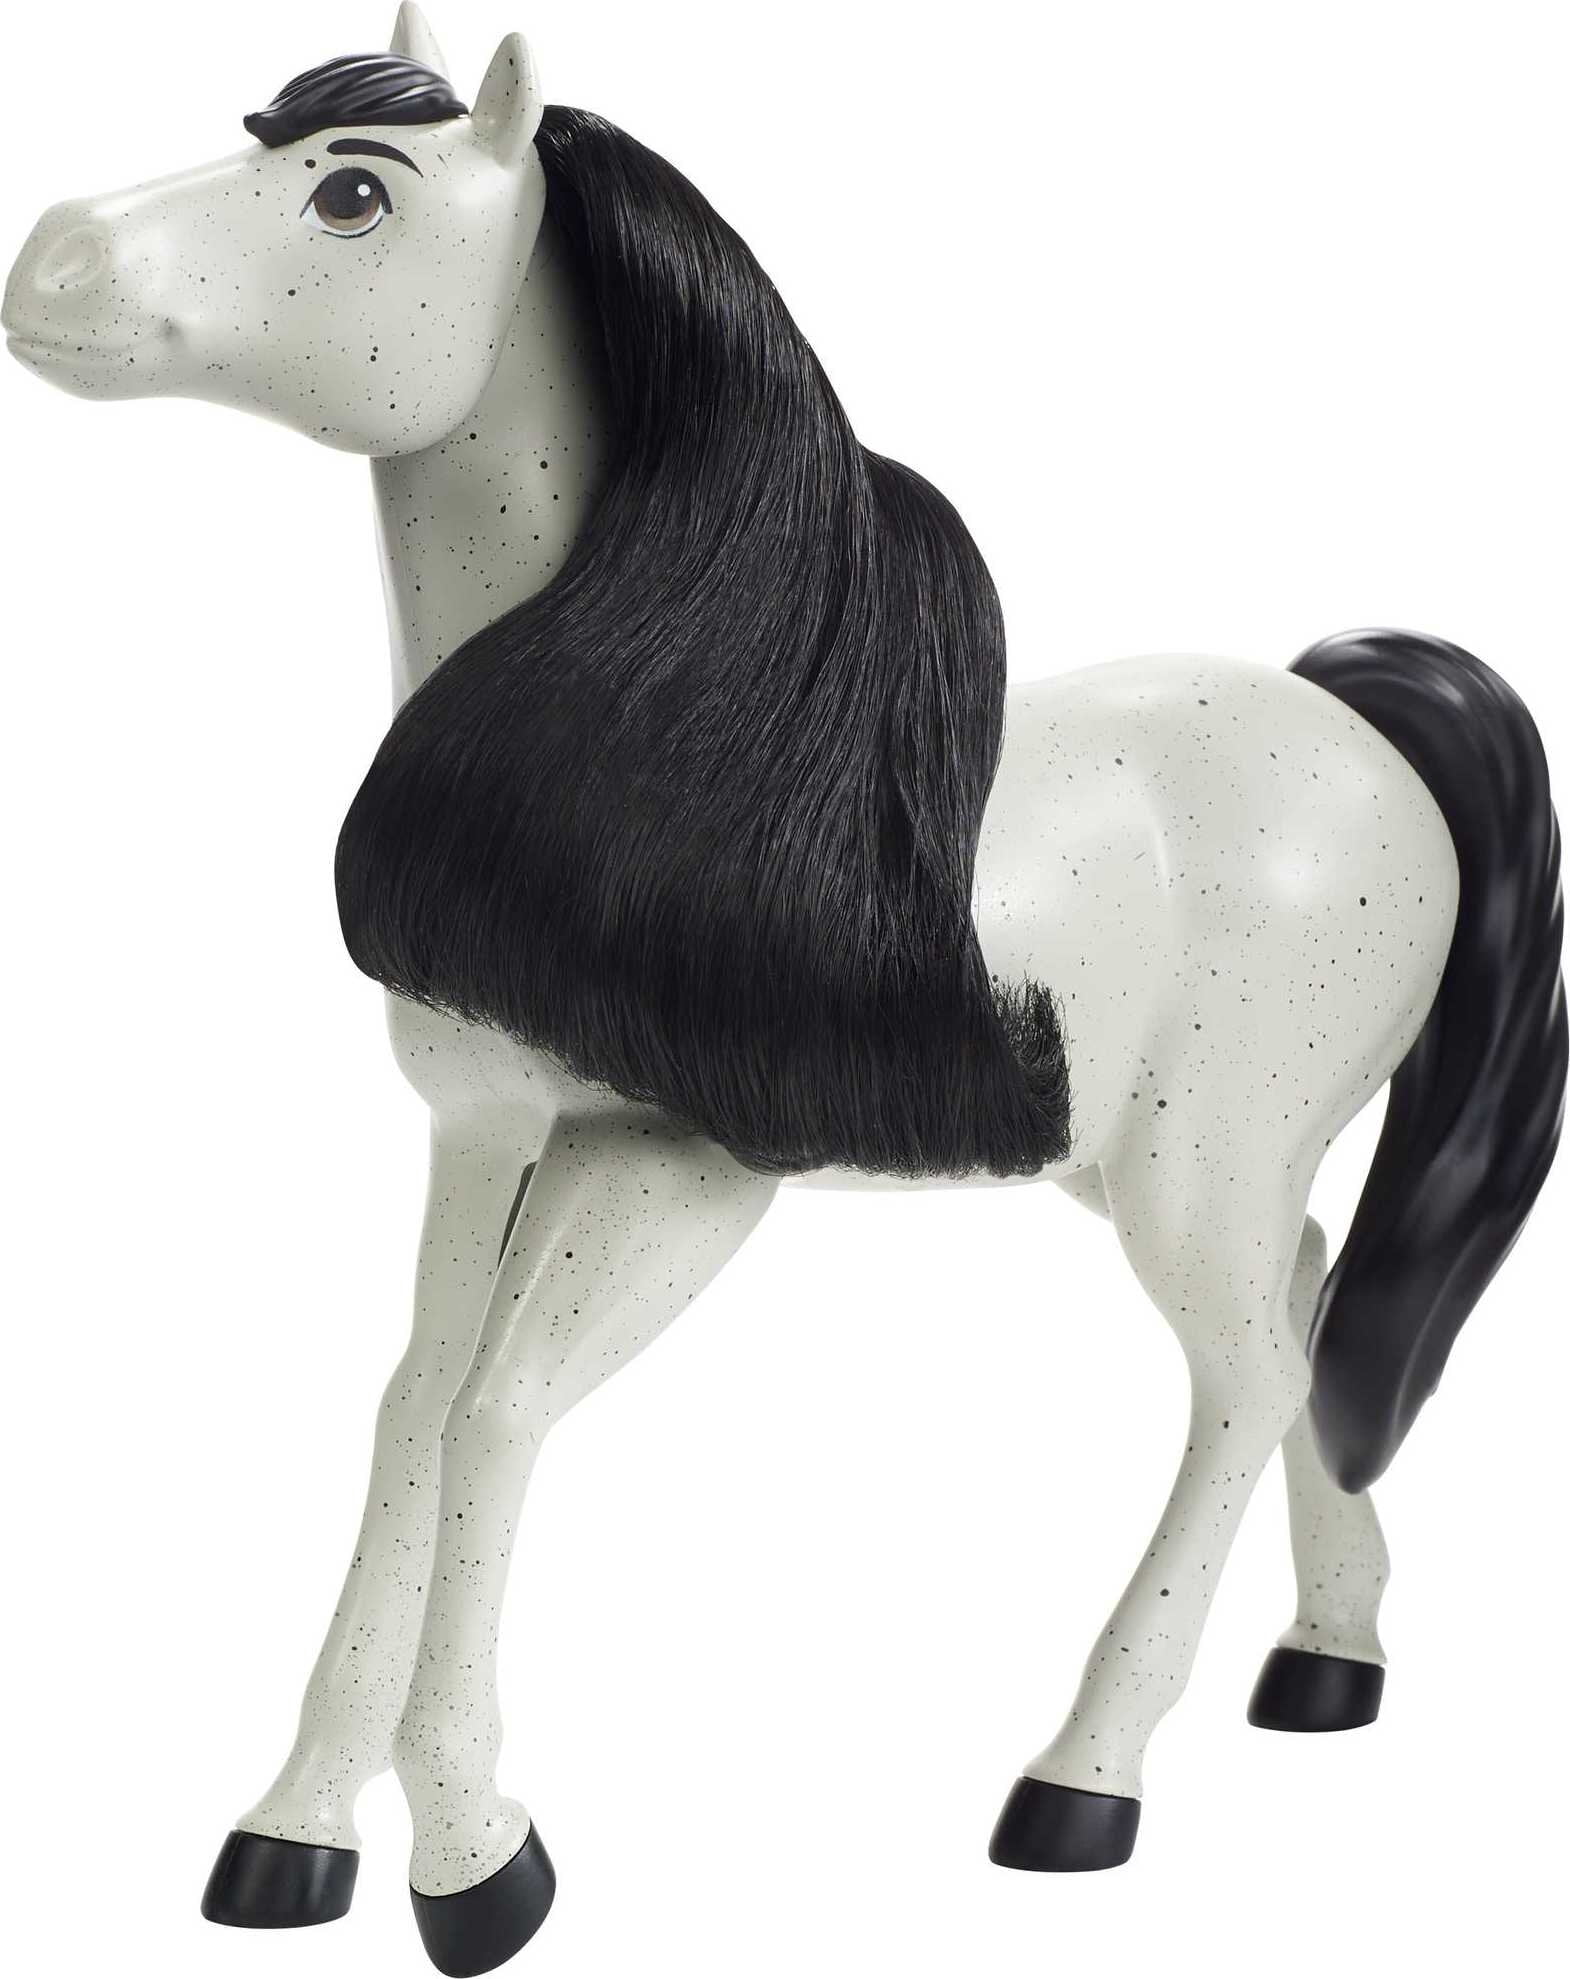 Moving Head Approx. 8-in Mattel Spirit Untamed Herd Horse Bay Pinto with Long Black Mane & Playful Stance​ Great Gift for Horse Fans Ages 3 Years Old & Up GXD99